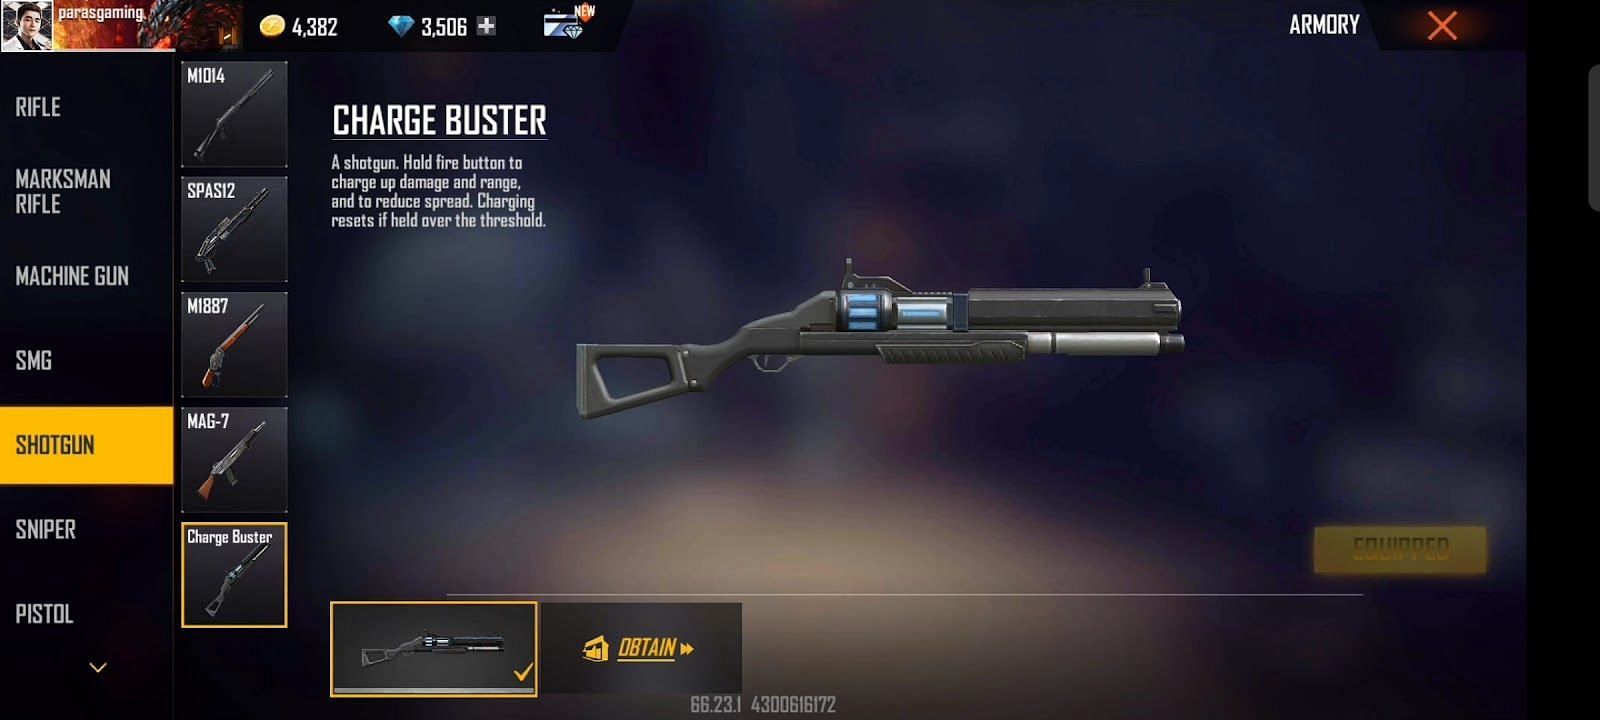 New Charge Buster weapon in Free Fire (Image via Paras Gaming FF/YouTube)